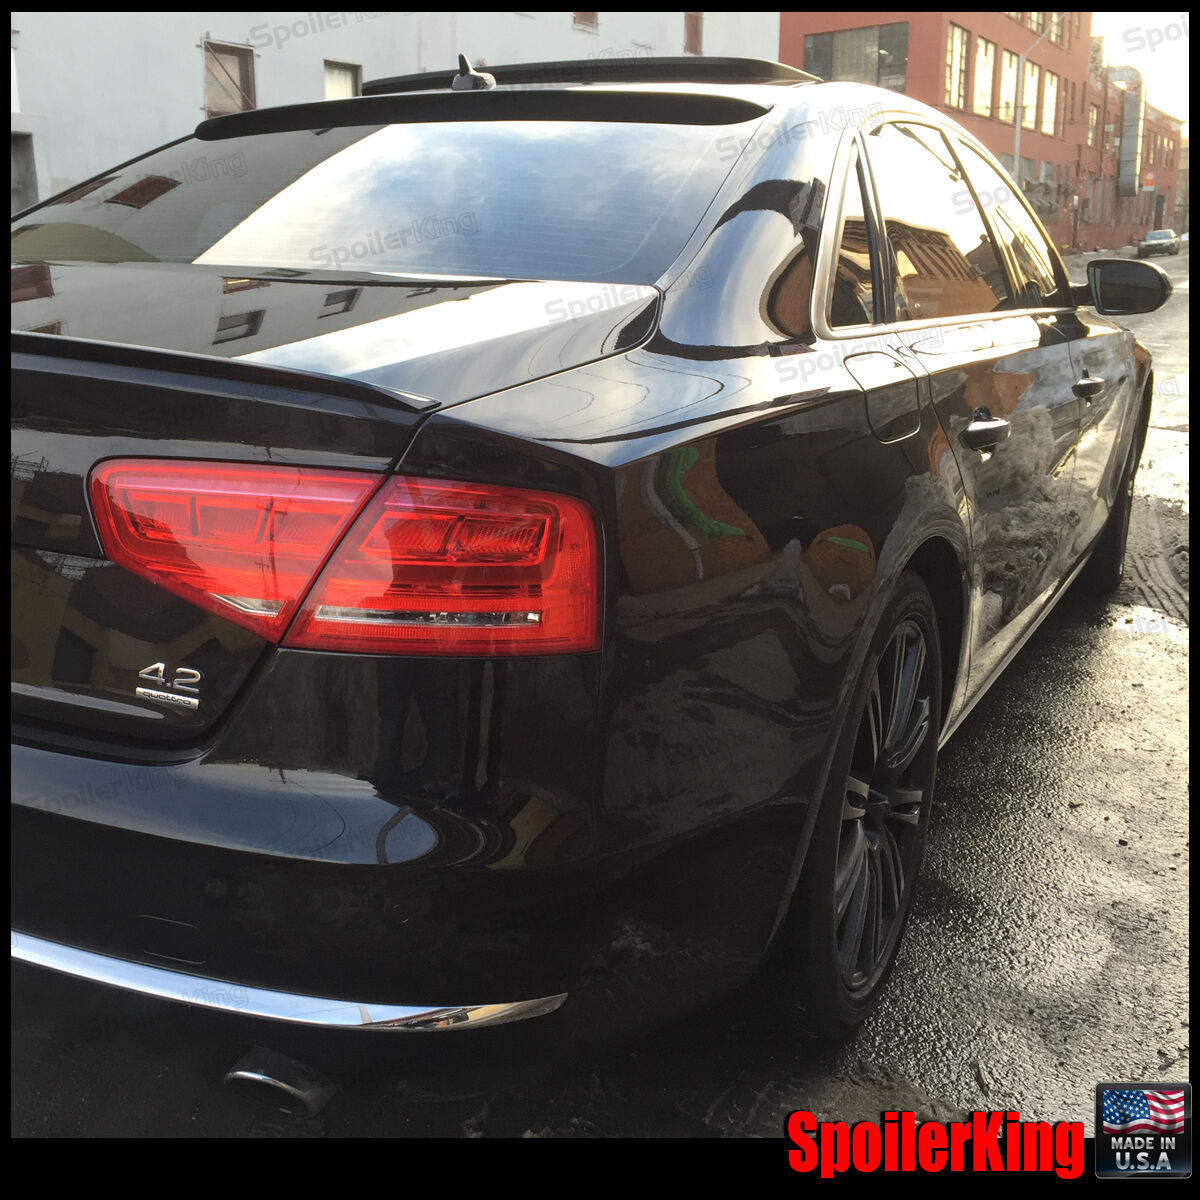 SpoilerKing Roof Spoiler & Trunk Wing Combo 284R/244L Fits: Audi A8/S8/A8L 10-17